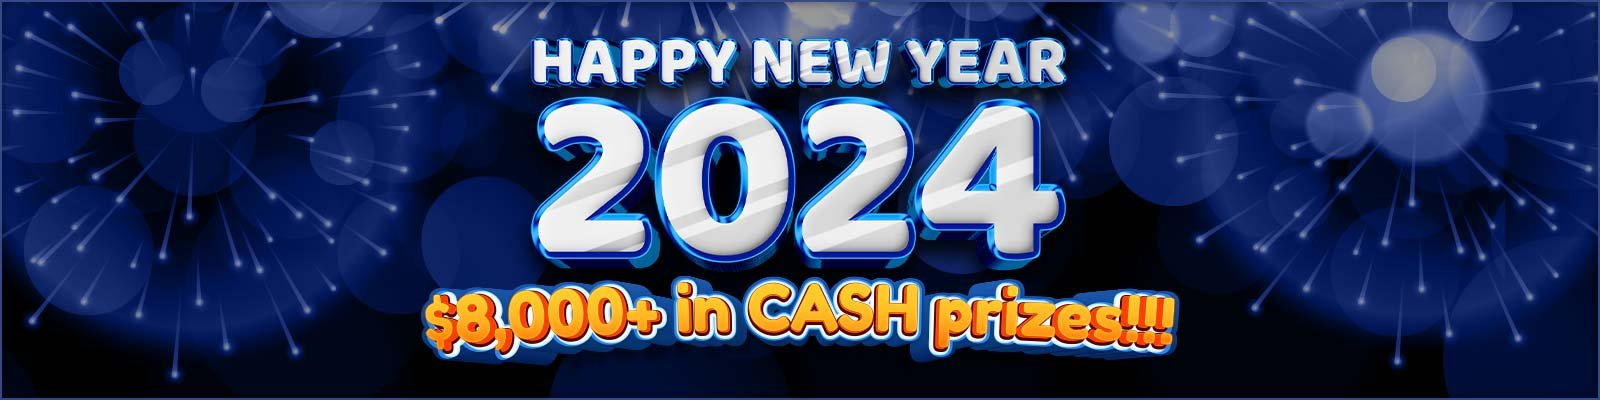 NEW YEAR: $2,024 JACKPOTS + $250,000 IN PRIZES!